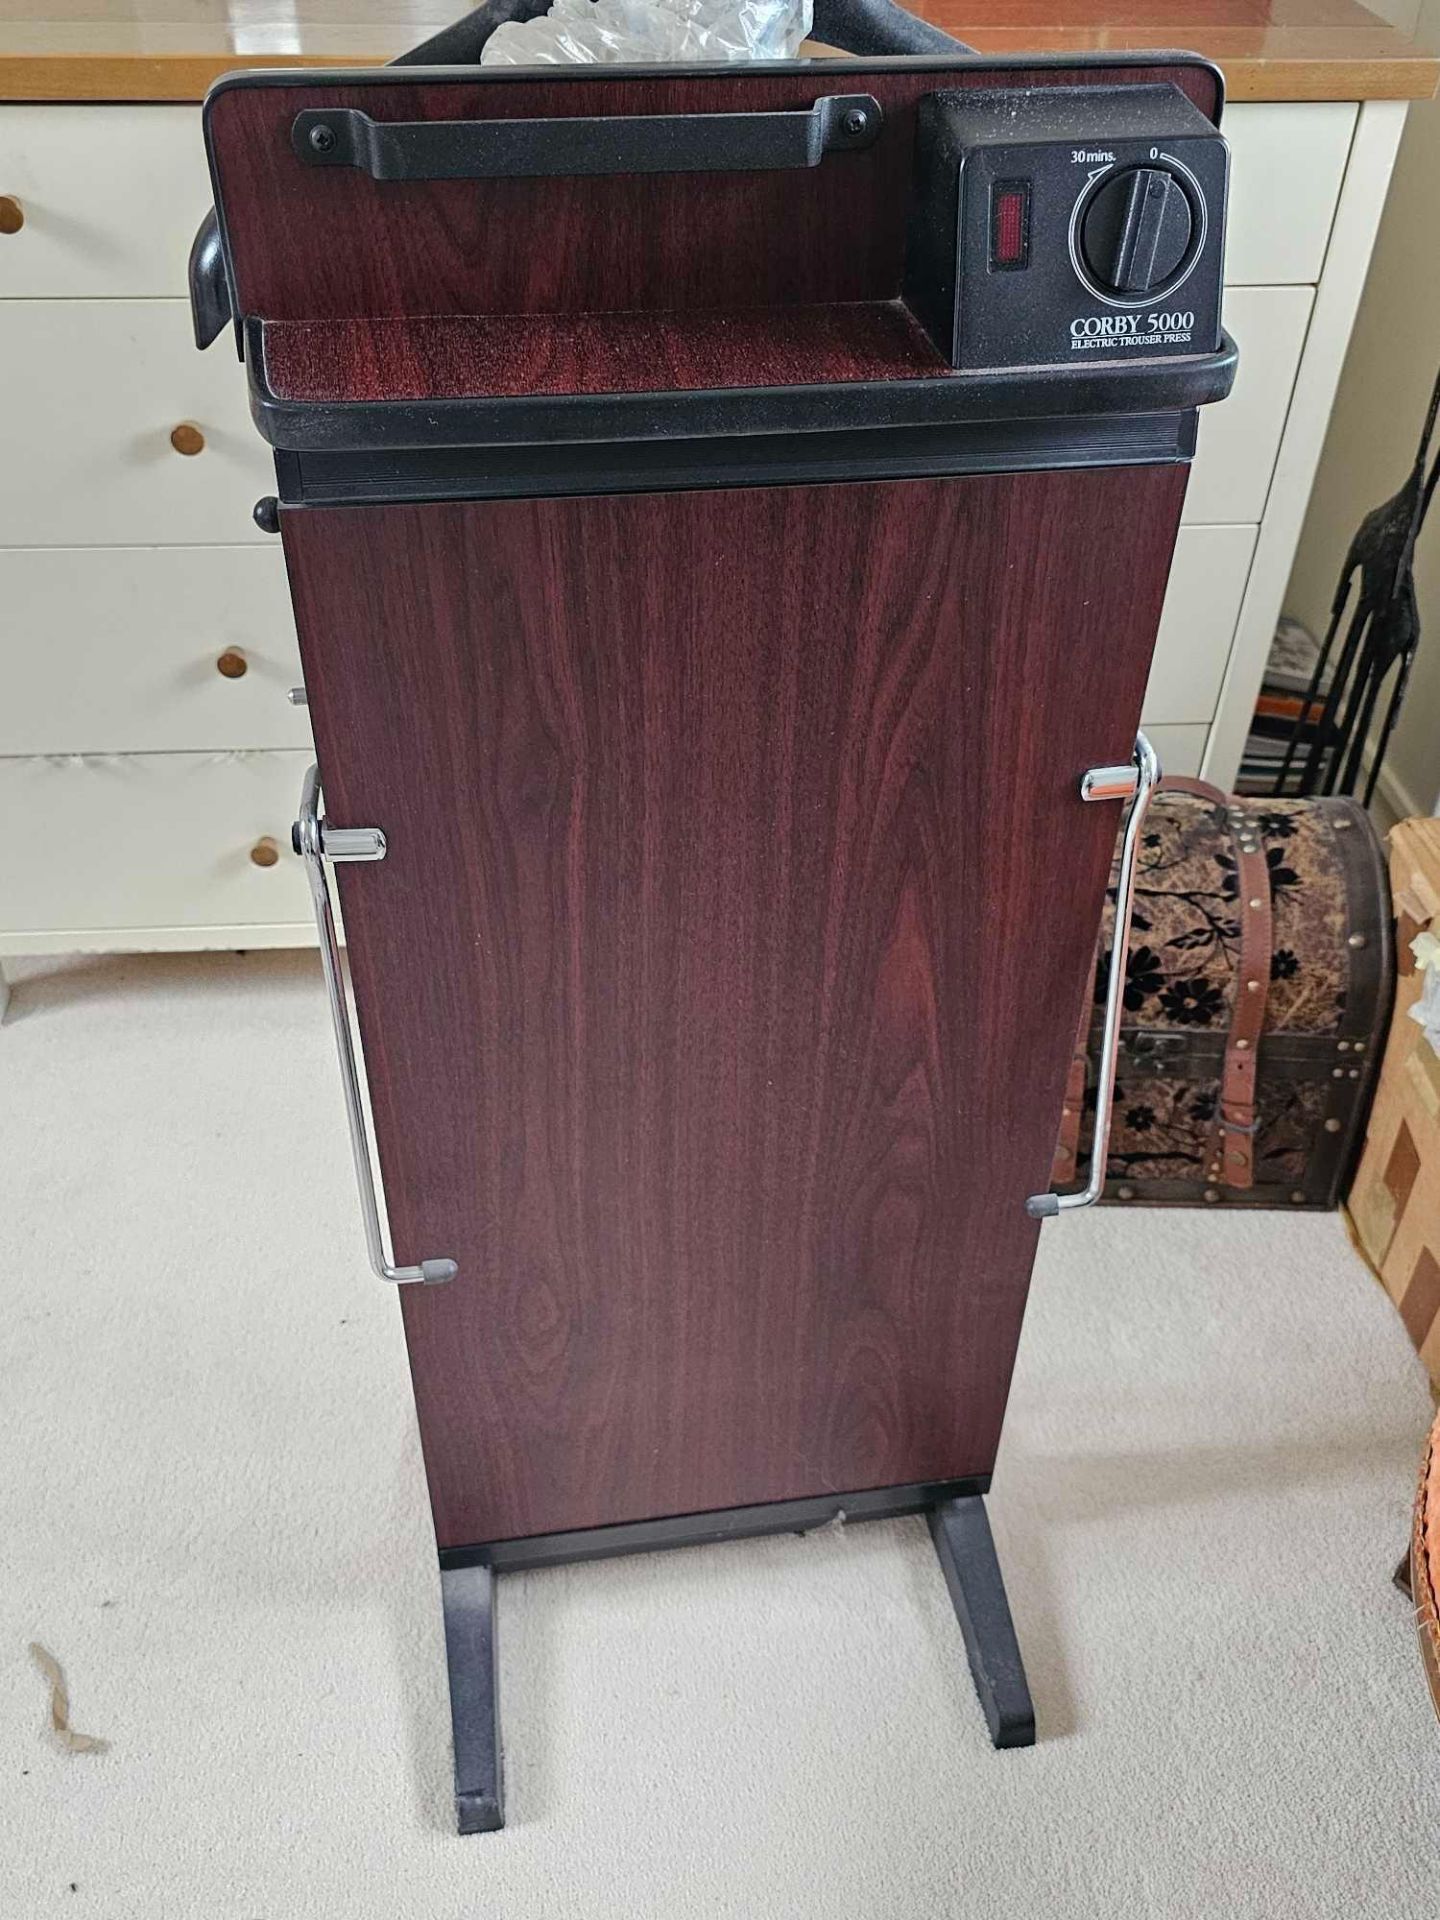 A Corby 5000 Trouser Press - Image 3 of 3